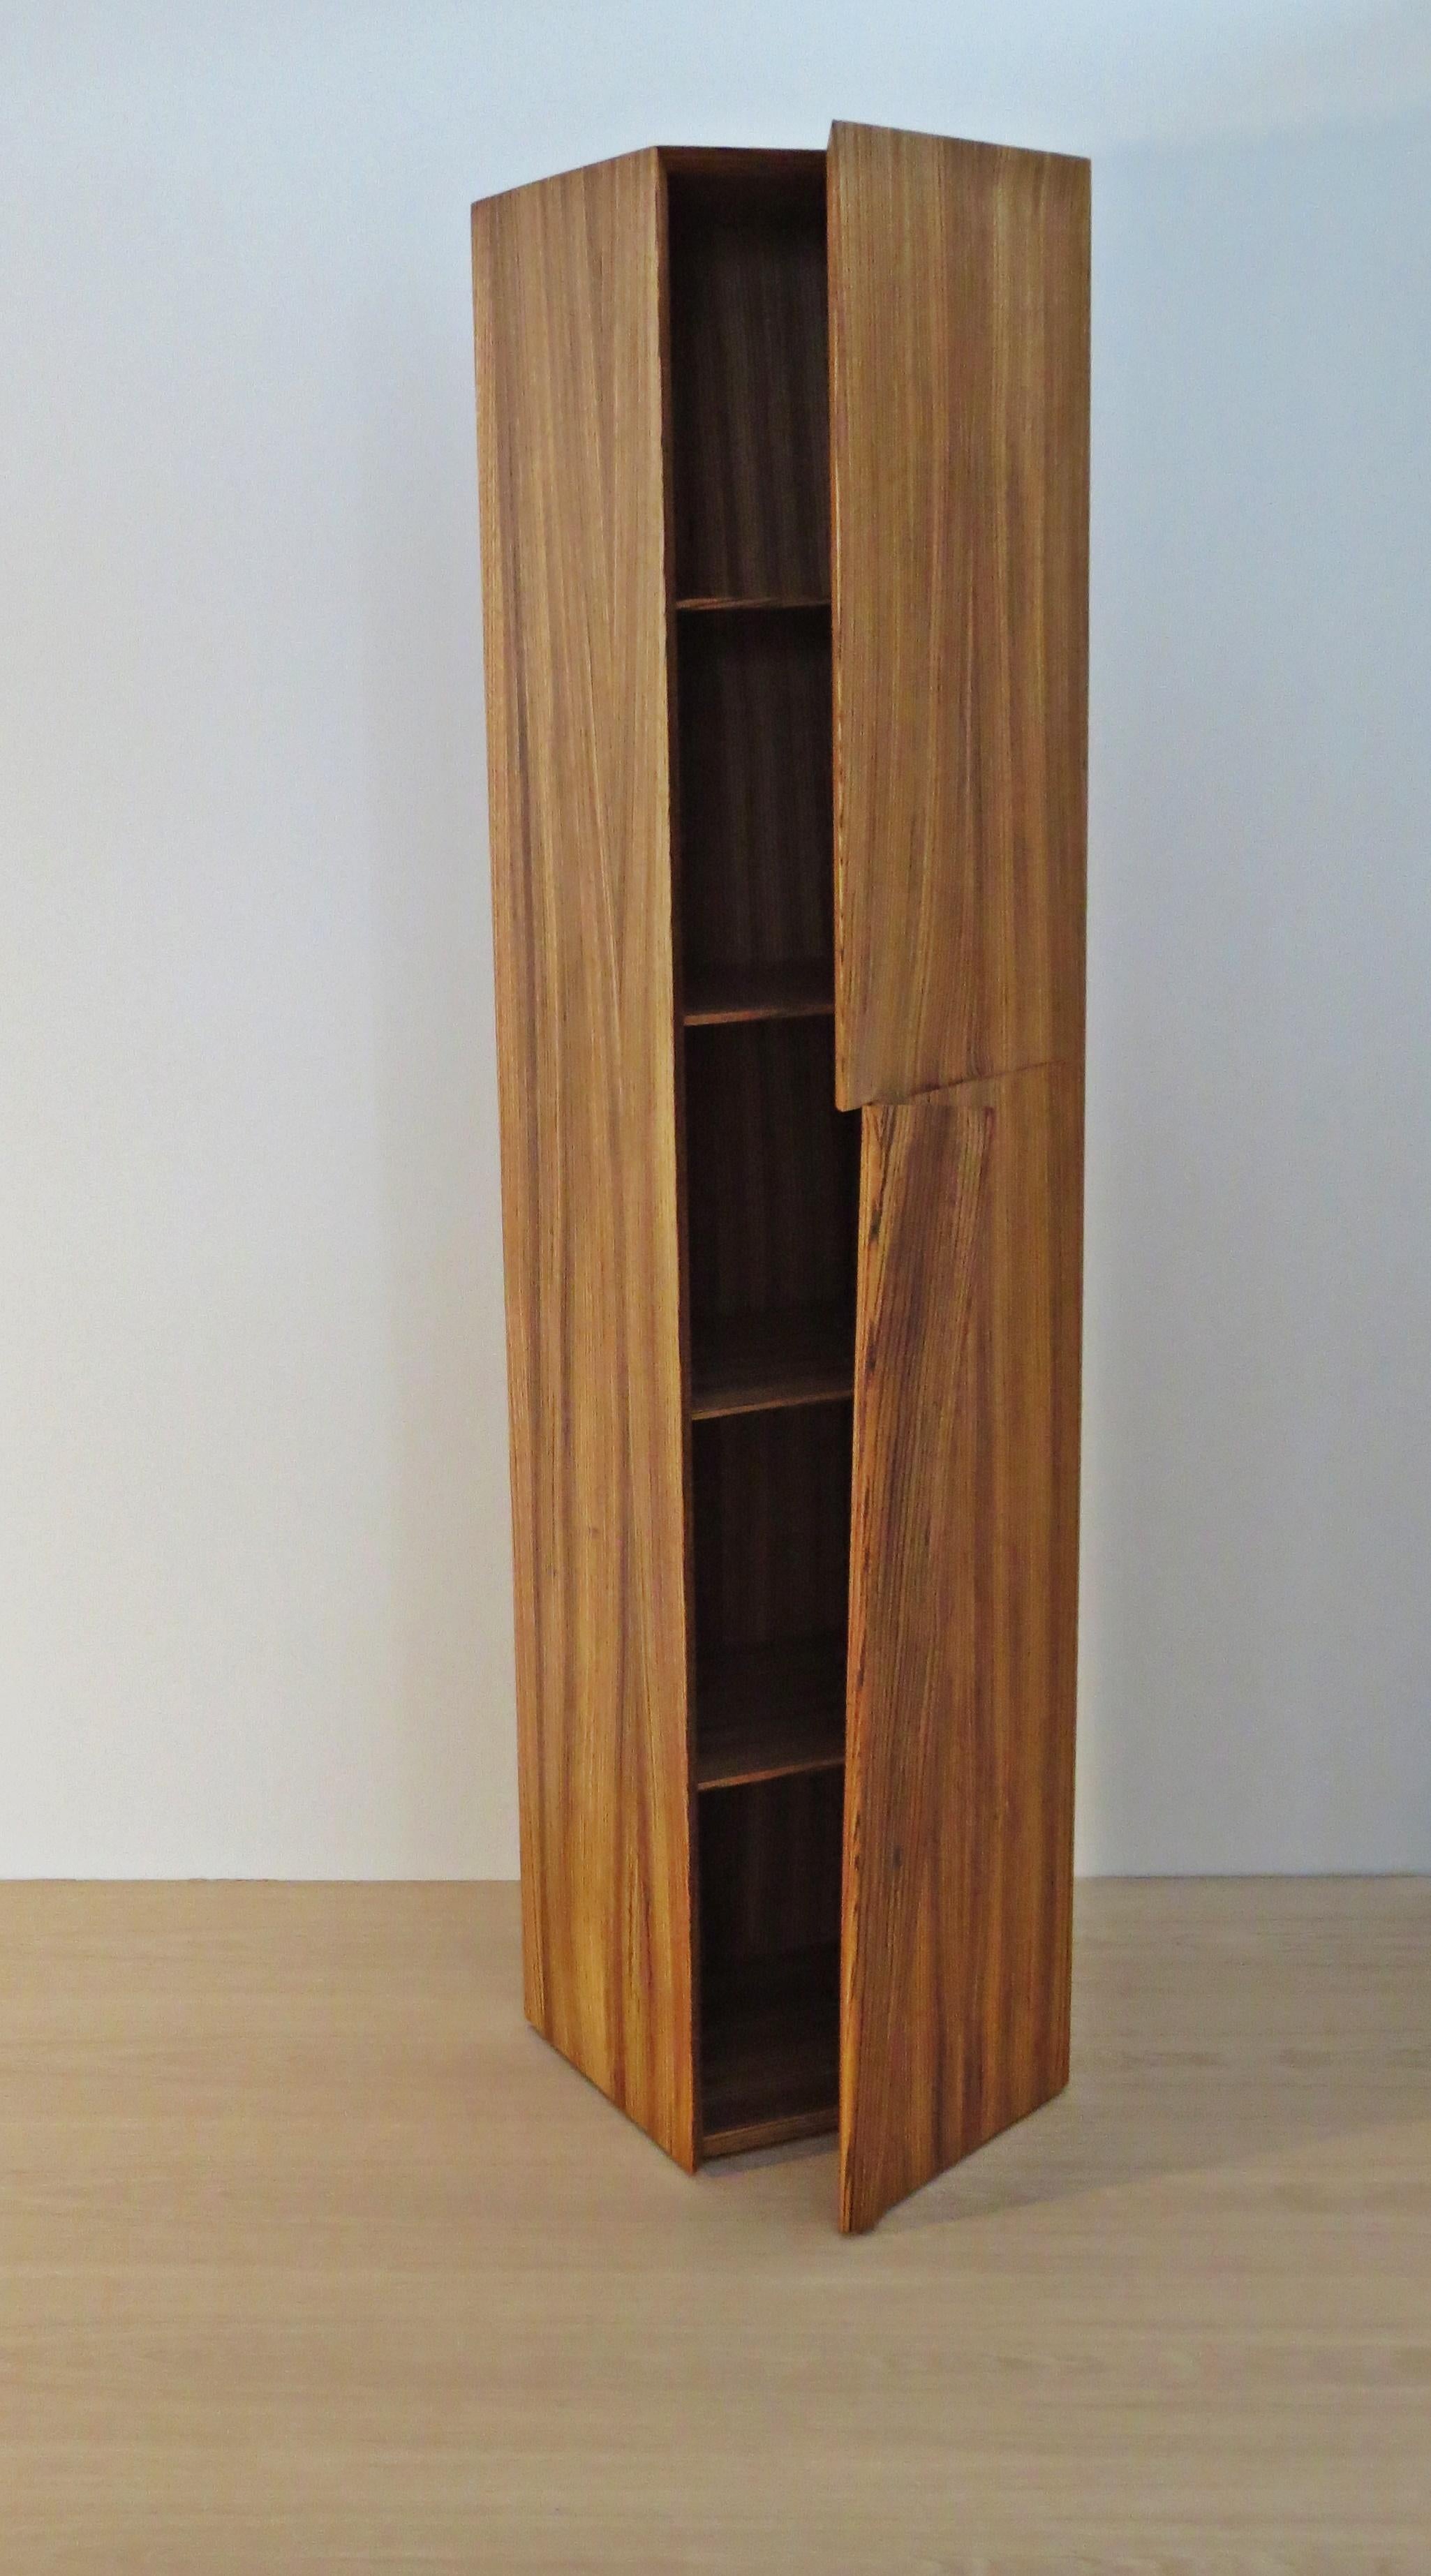 Tall cabinet handmade from solid Zebrano (African Zebrawood).
Created by the German furniture maker and sculptor Eckehard Weimann.

The modern rectilinear body is broken by the grip:
this is sculpted, folded like a dog's ear, folded.

Single